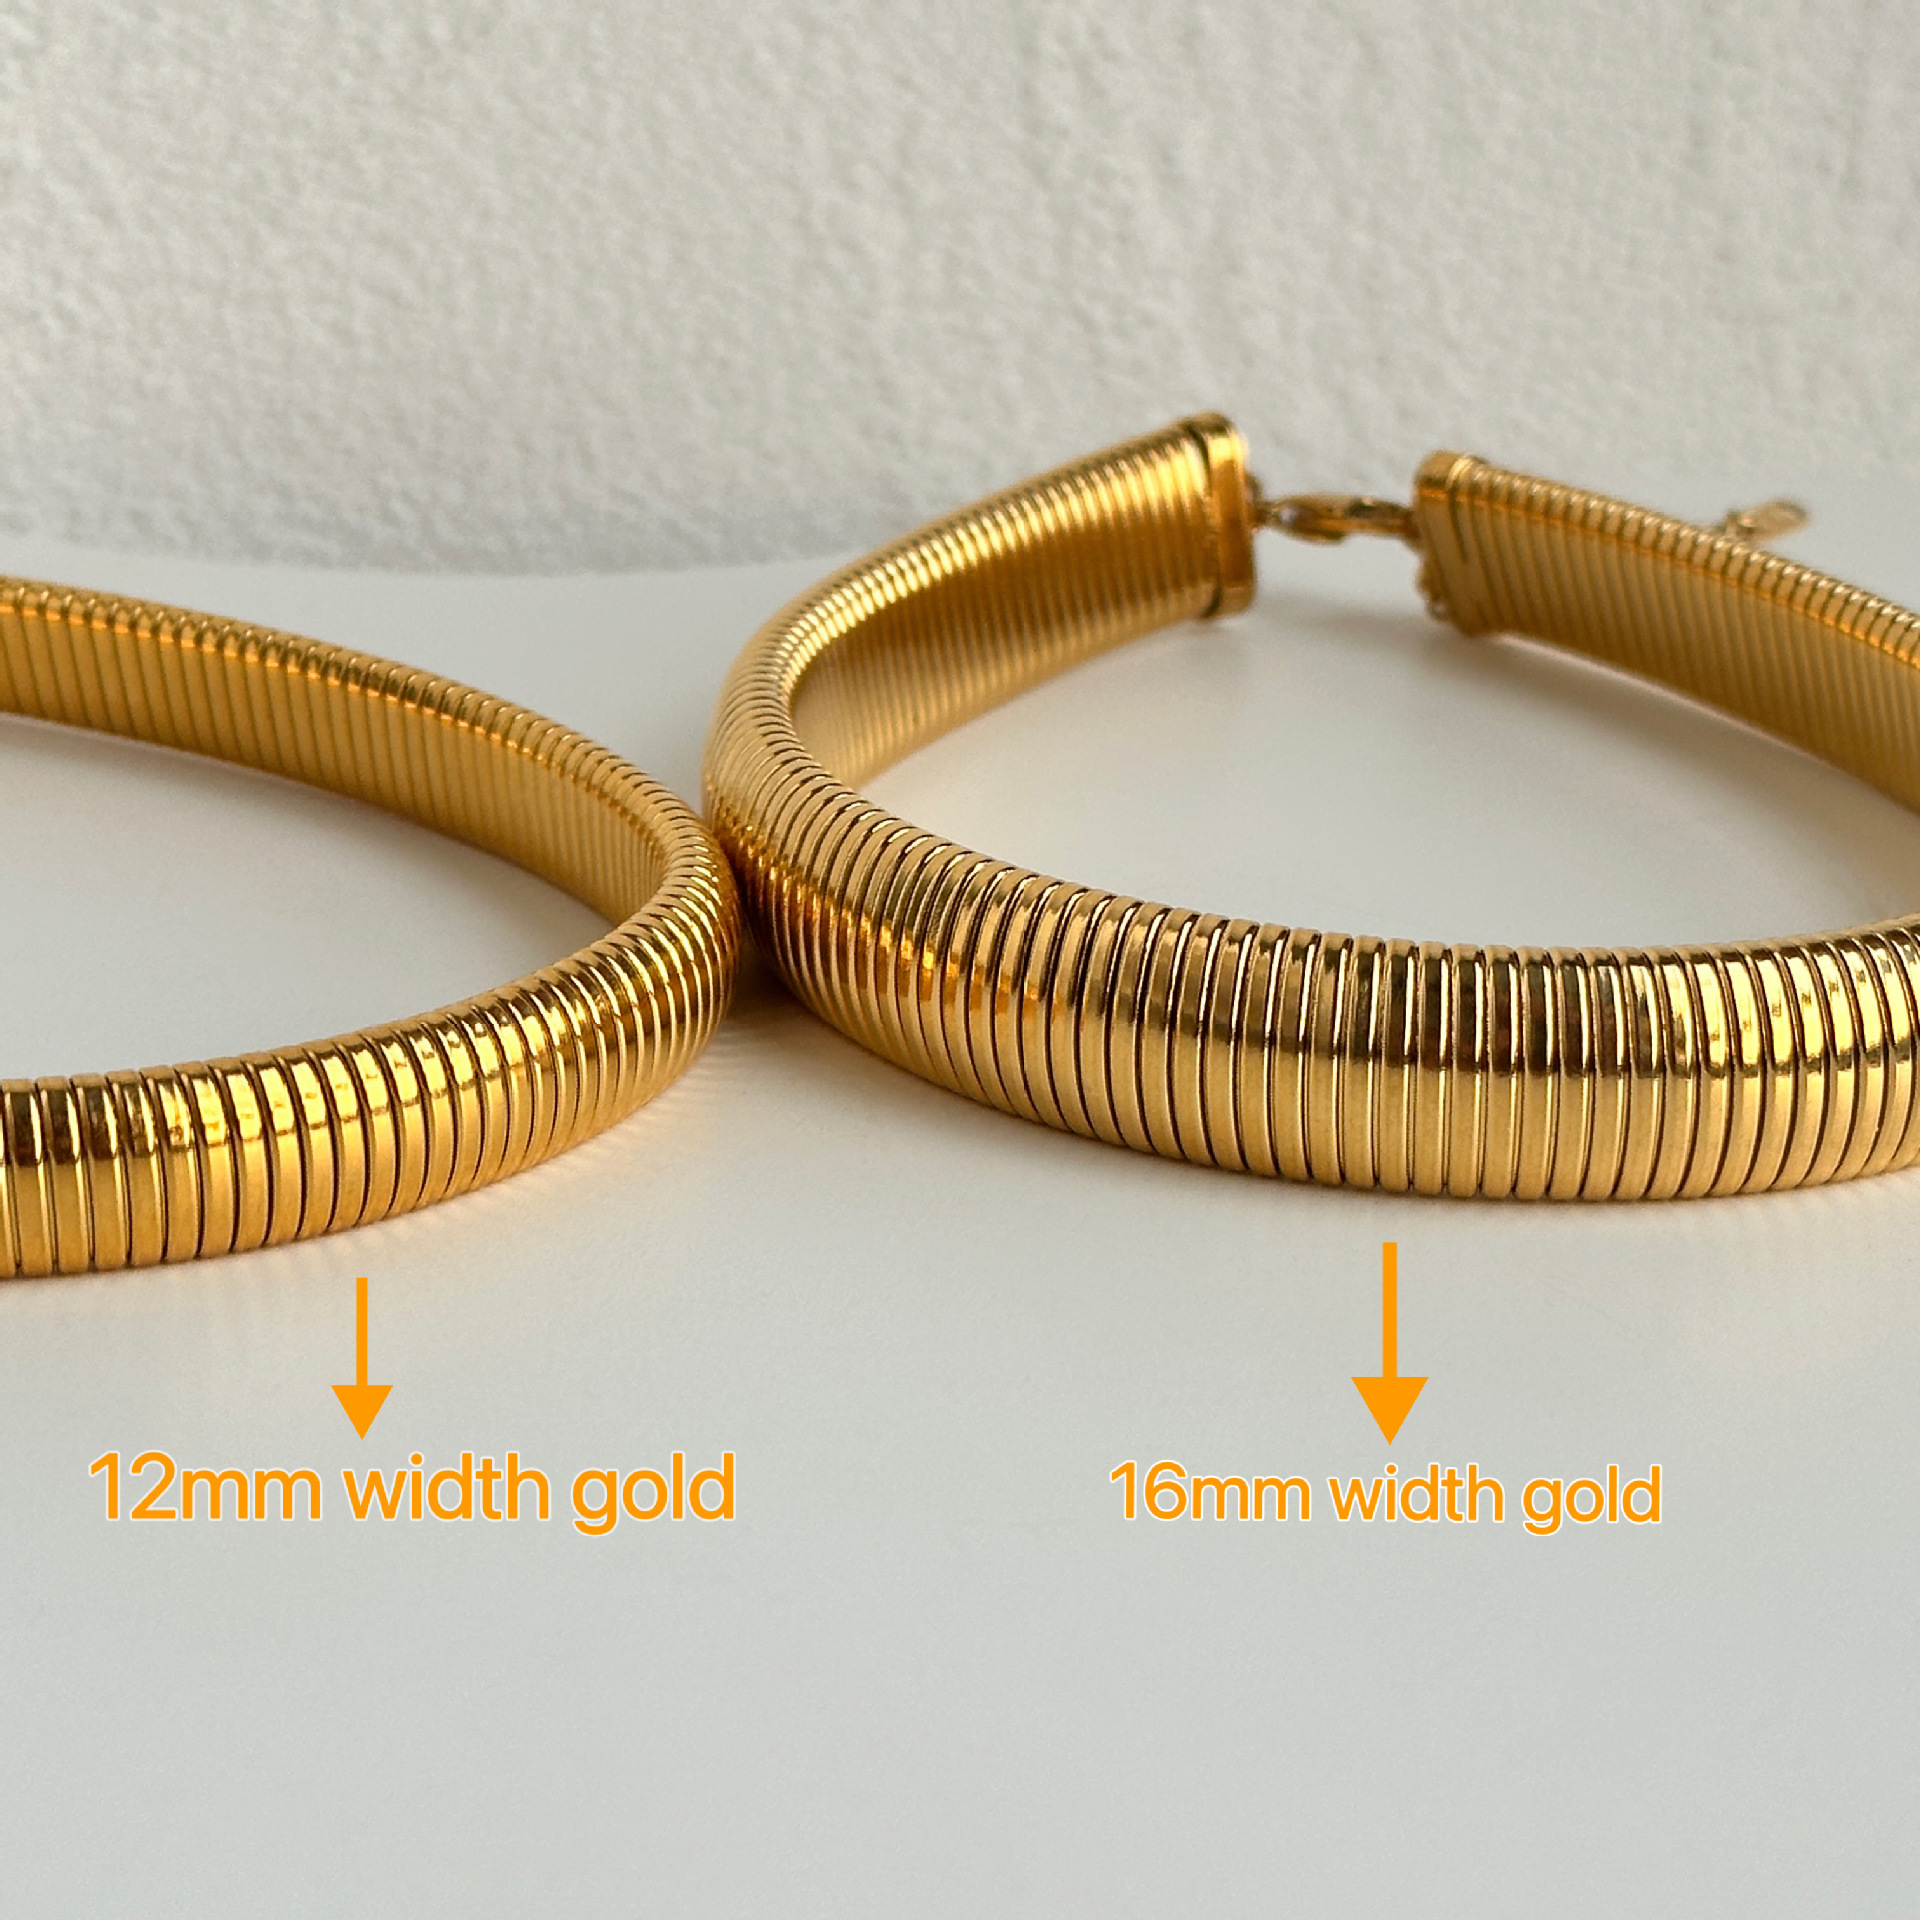 16mm wide, gold